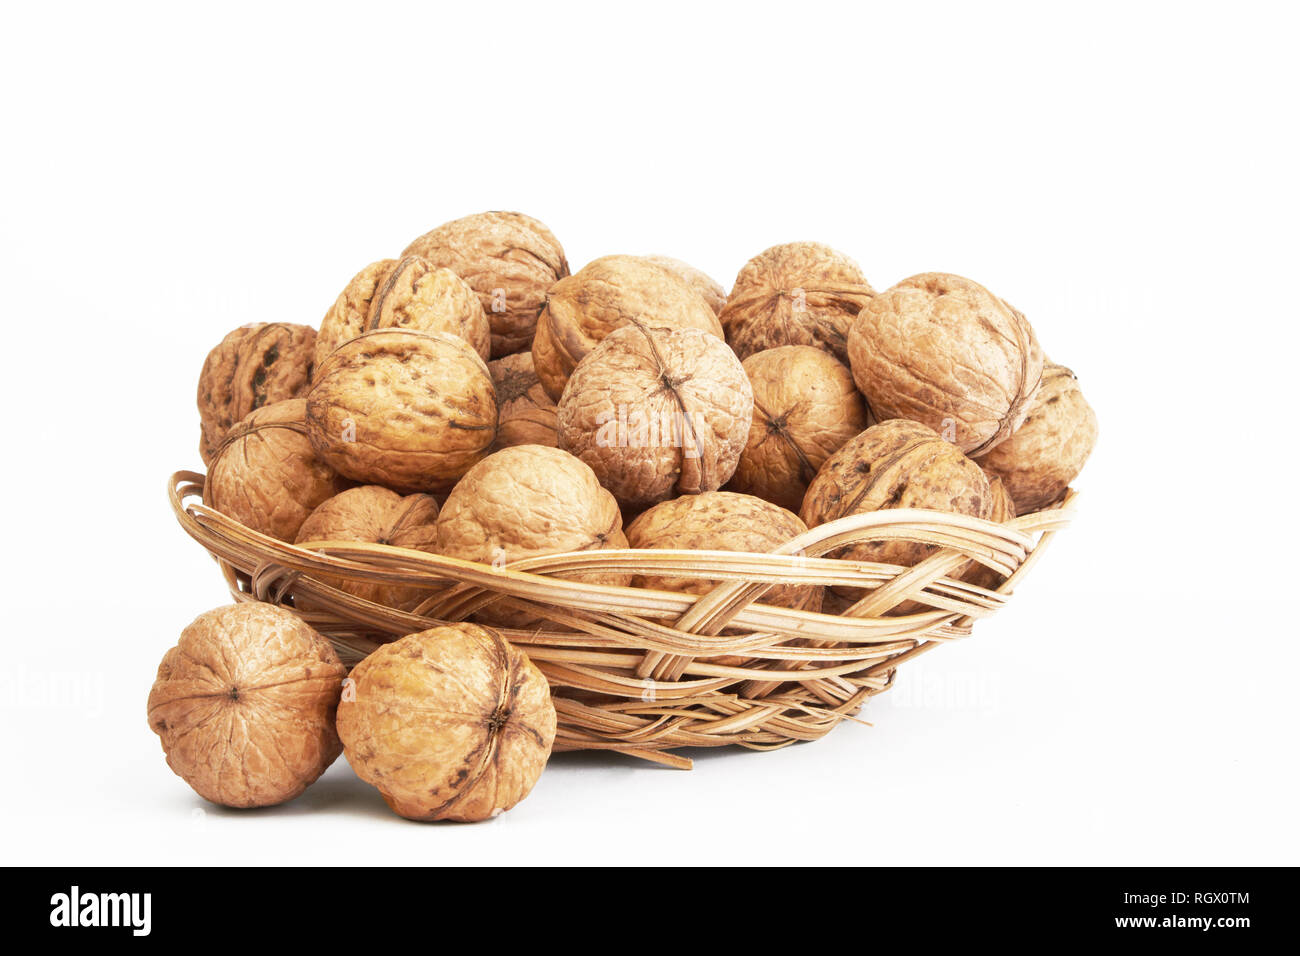 walnuts in a basket on a white background Stock Photo